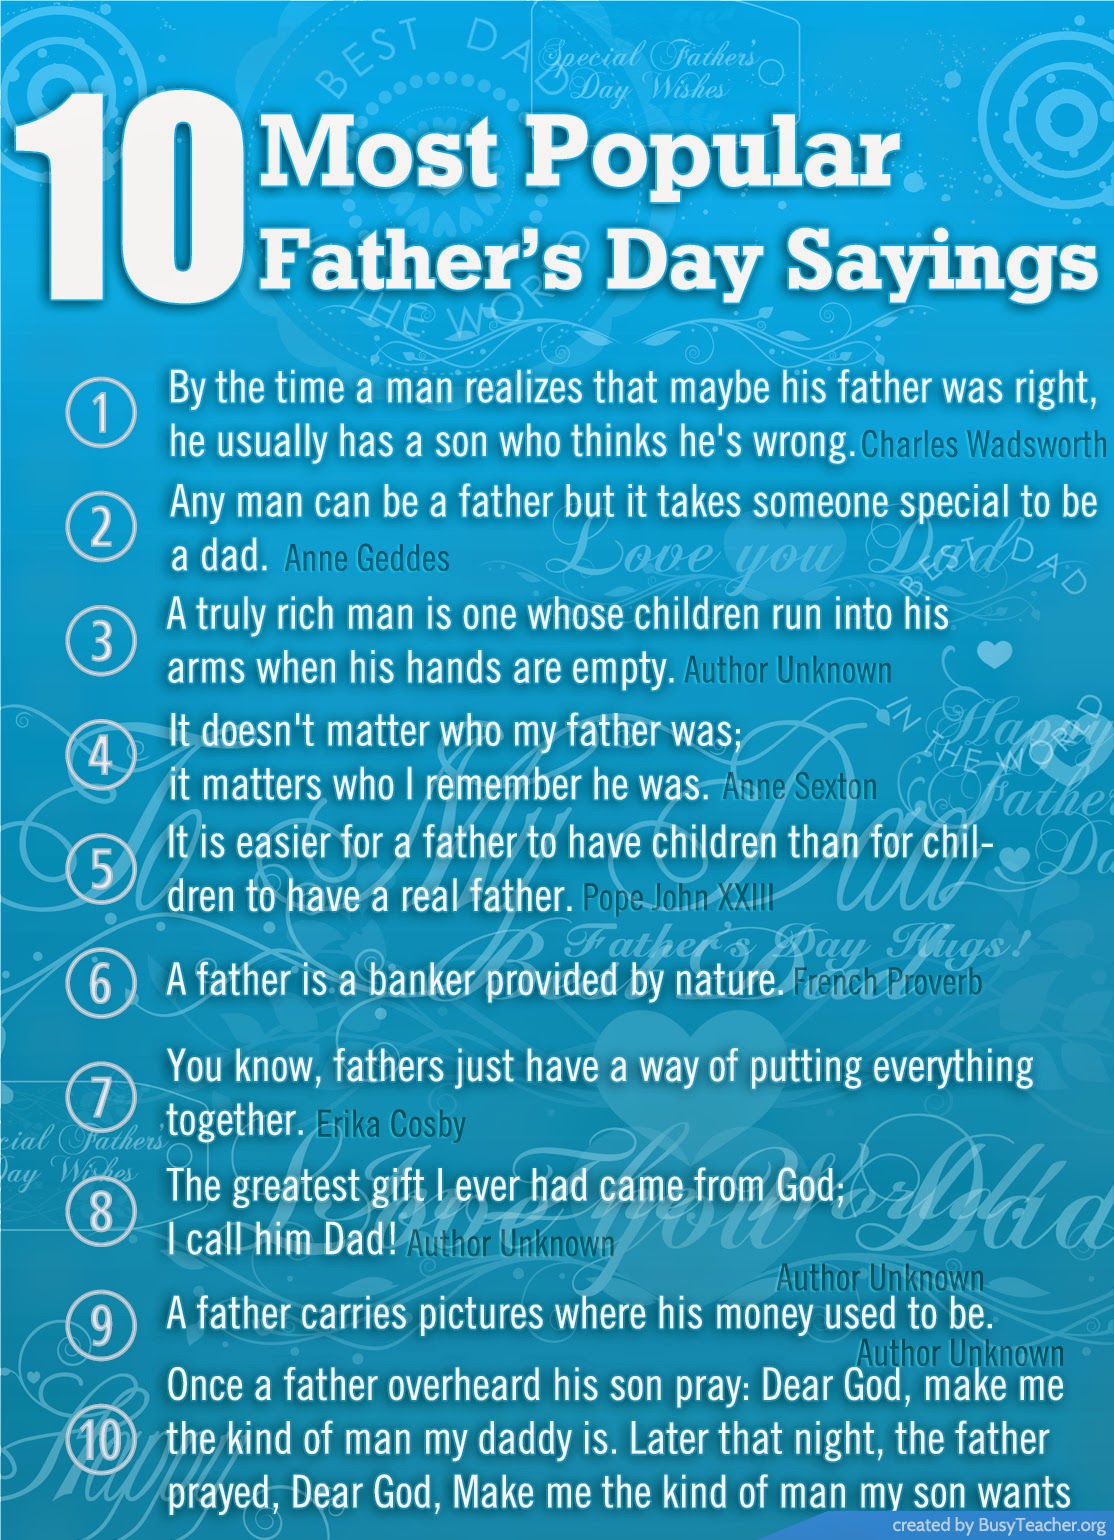 10 Most Popular Father's Day Sayings: